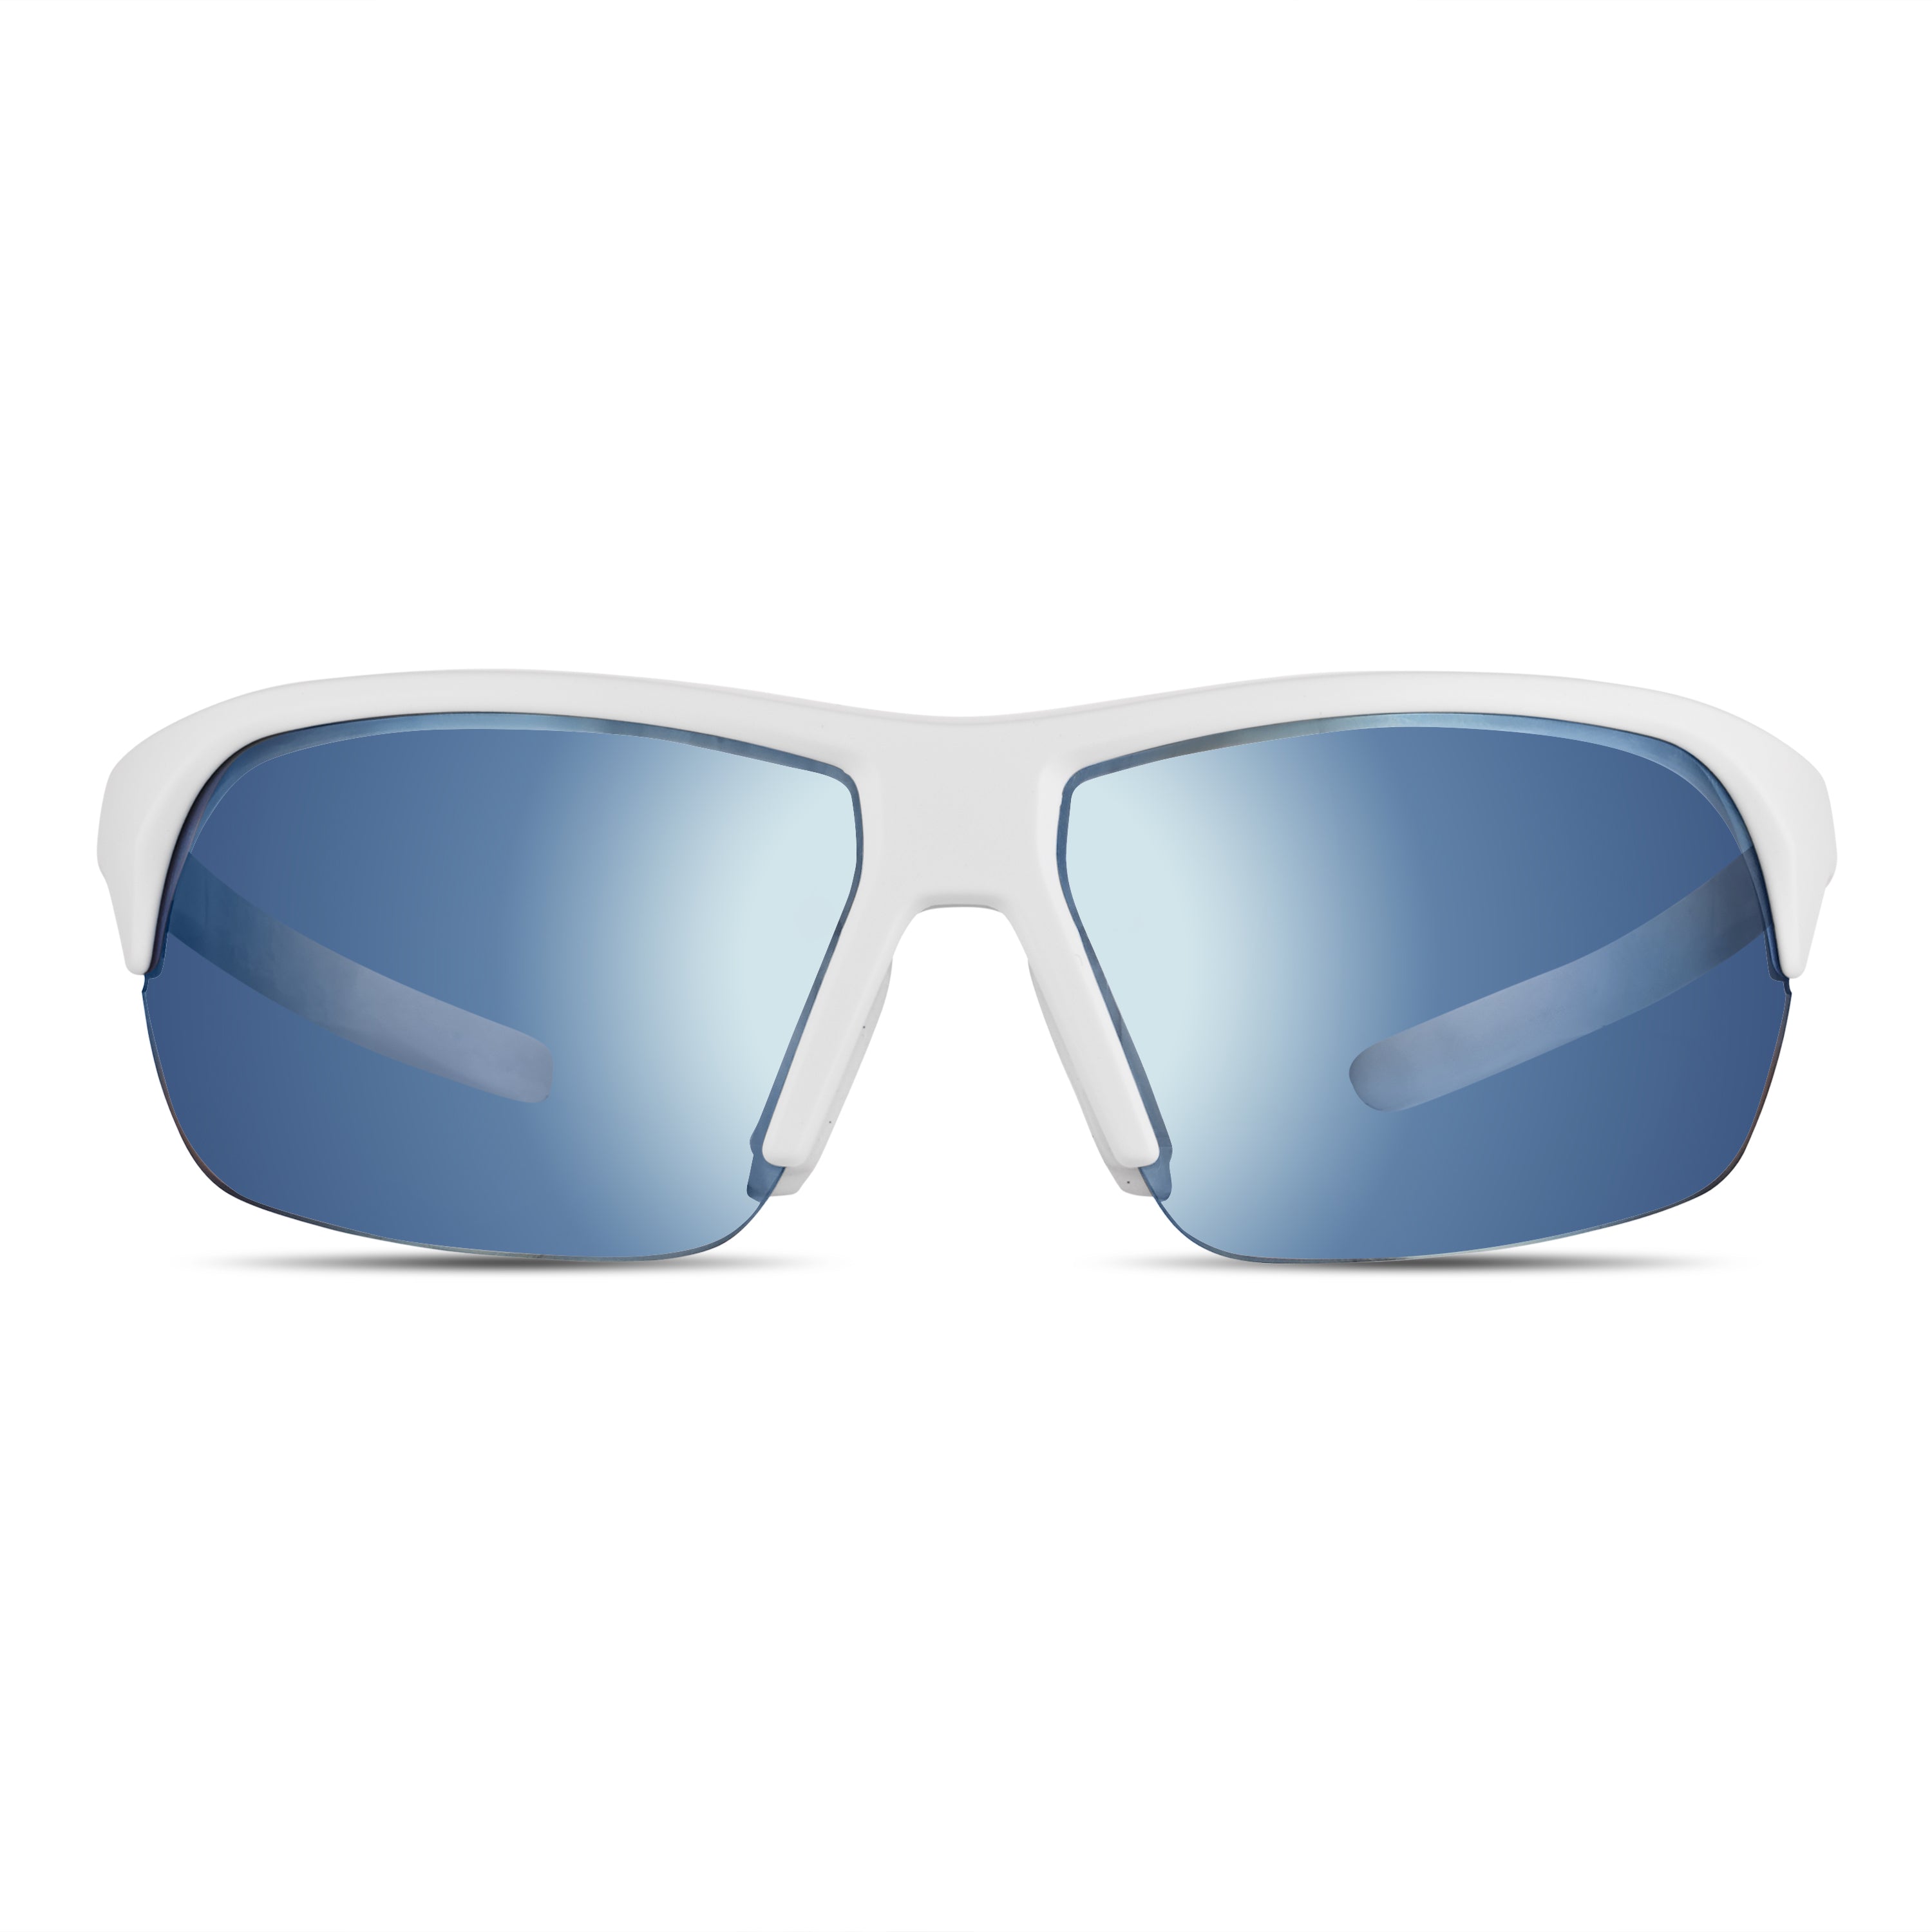 Oakley, Accessories, Oakley Sunglasses Clear With Blue Mirror Lens